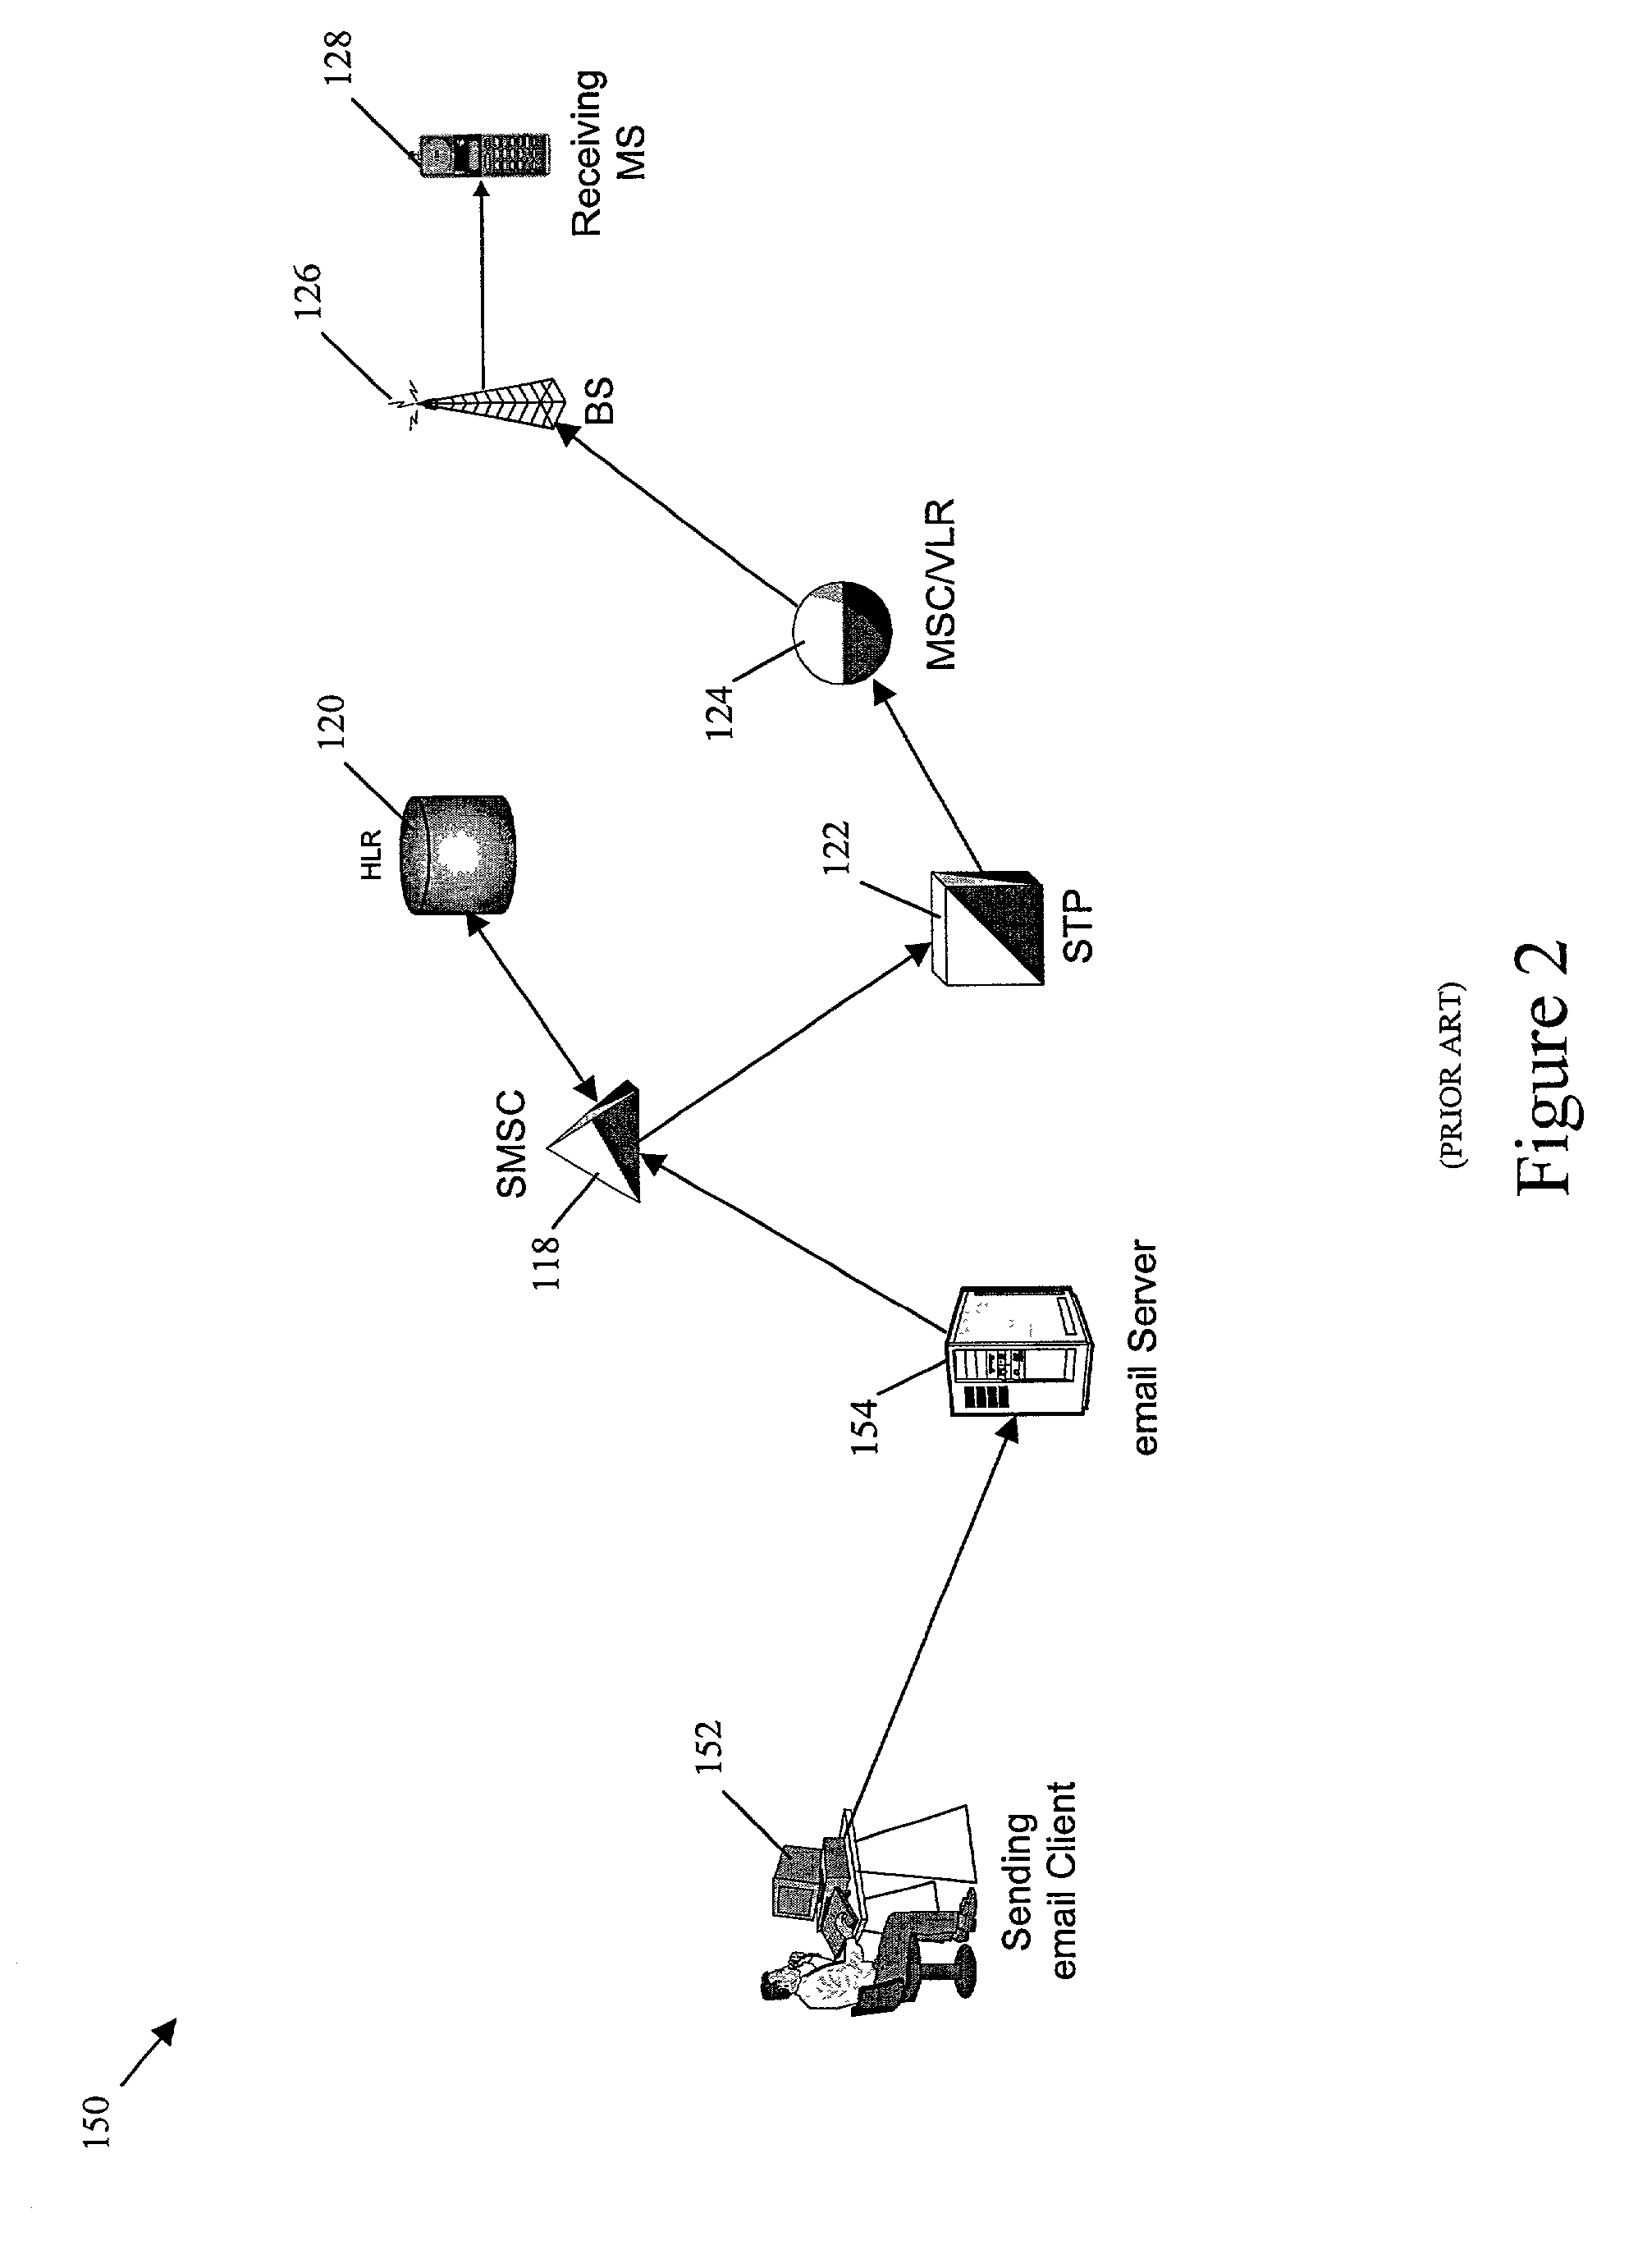 Methods and systems for preventing short message service (SMS) message flooding